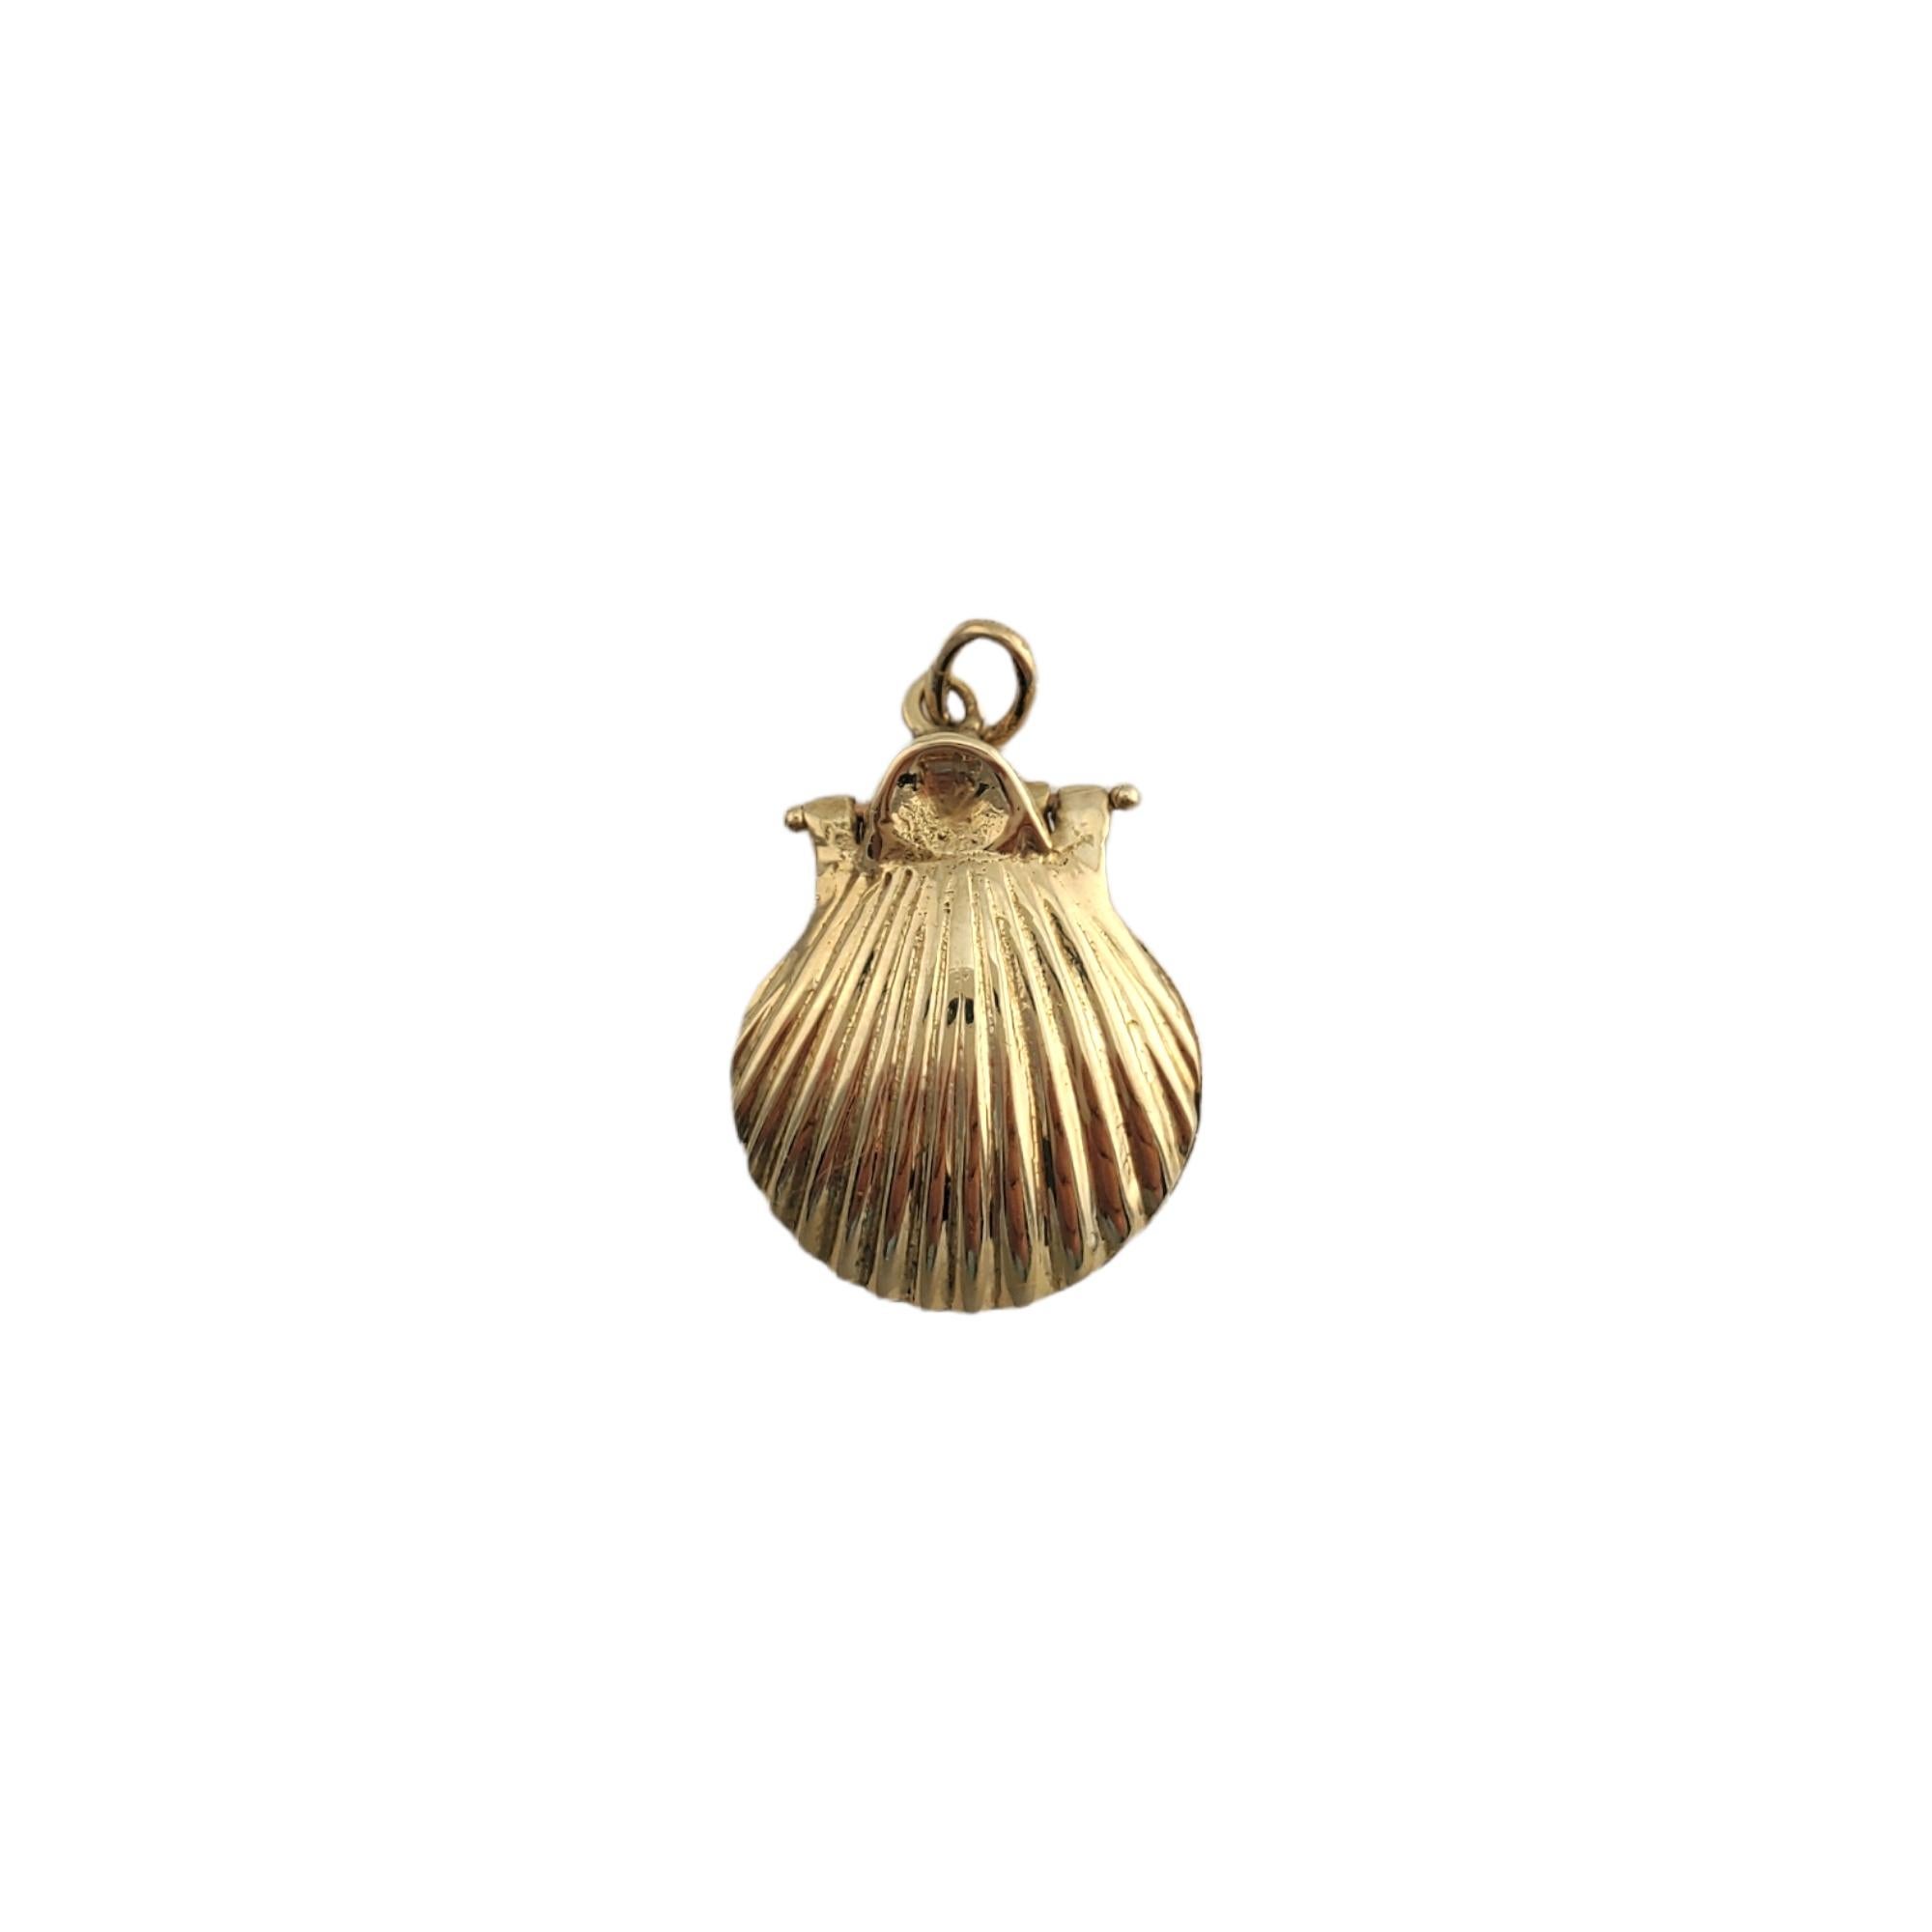 Vintage 14K Yellow Gold Articulated Clam Shell

This gorgeous piece features an articulating clam shell which opens up to what looks like a pearl.

Size: 21 mm X 14 mm

Weight: 4.8 g/ 3.0 dwt

Hallmark: 14K MFT (on loop)

Very good condition,